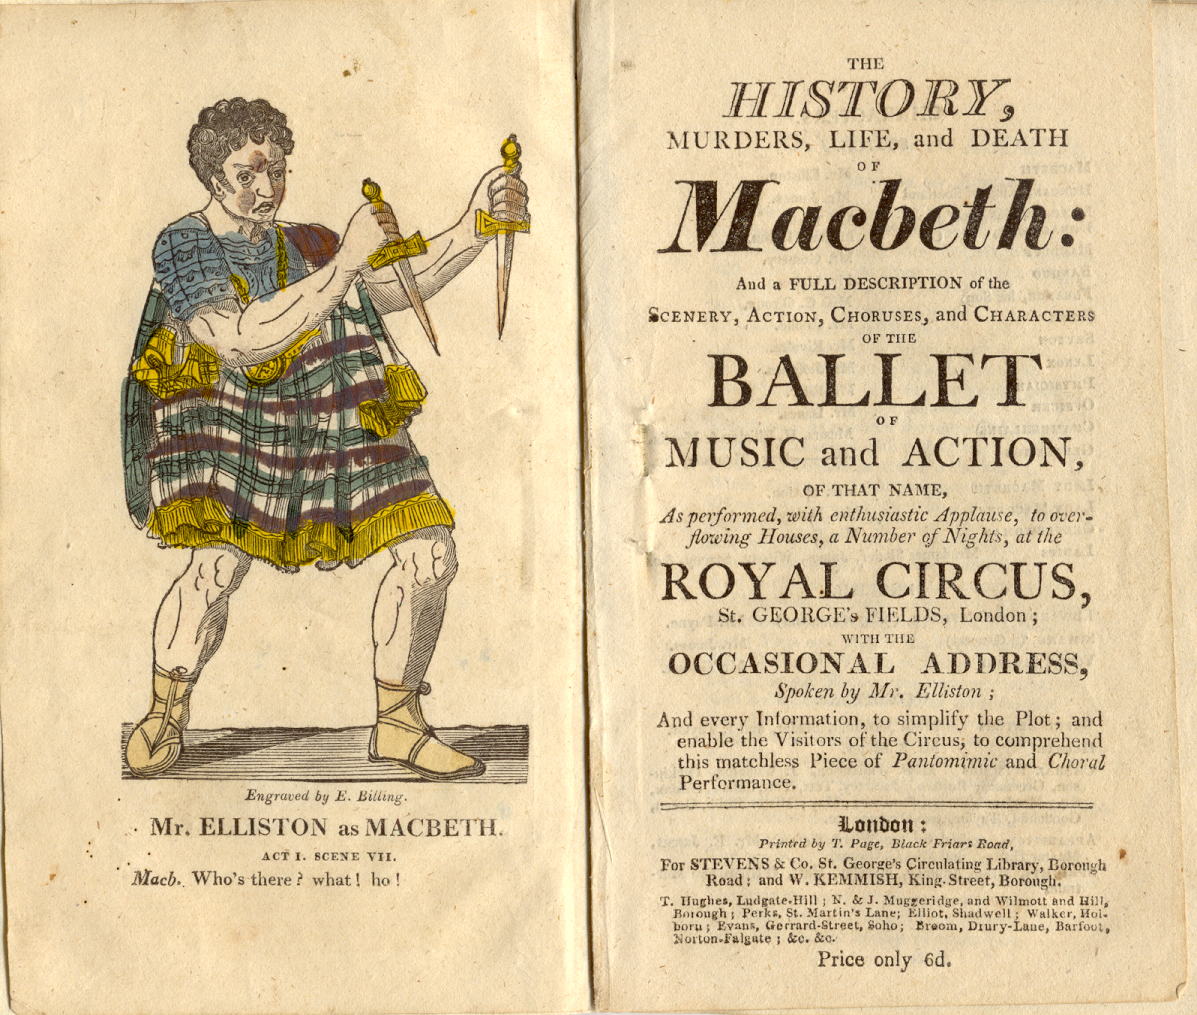 Title page for a ballet version of Macbeth, complete with am illustration of Macbeth holding two daggers. from the Pettingell collection.